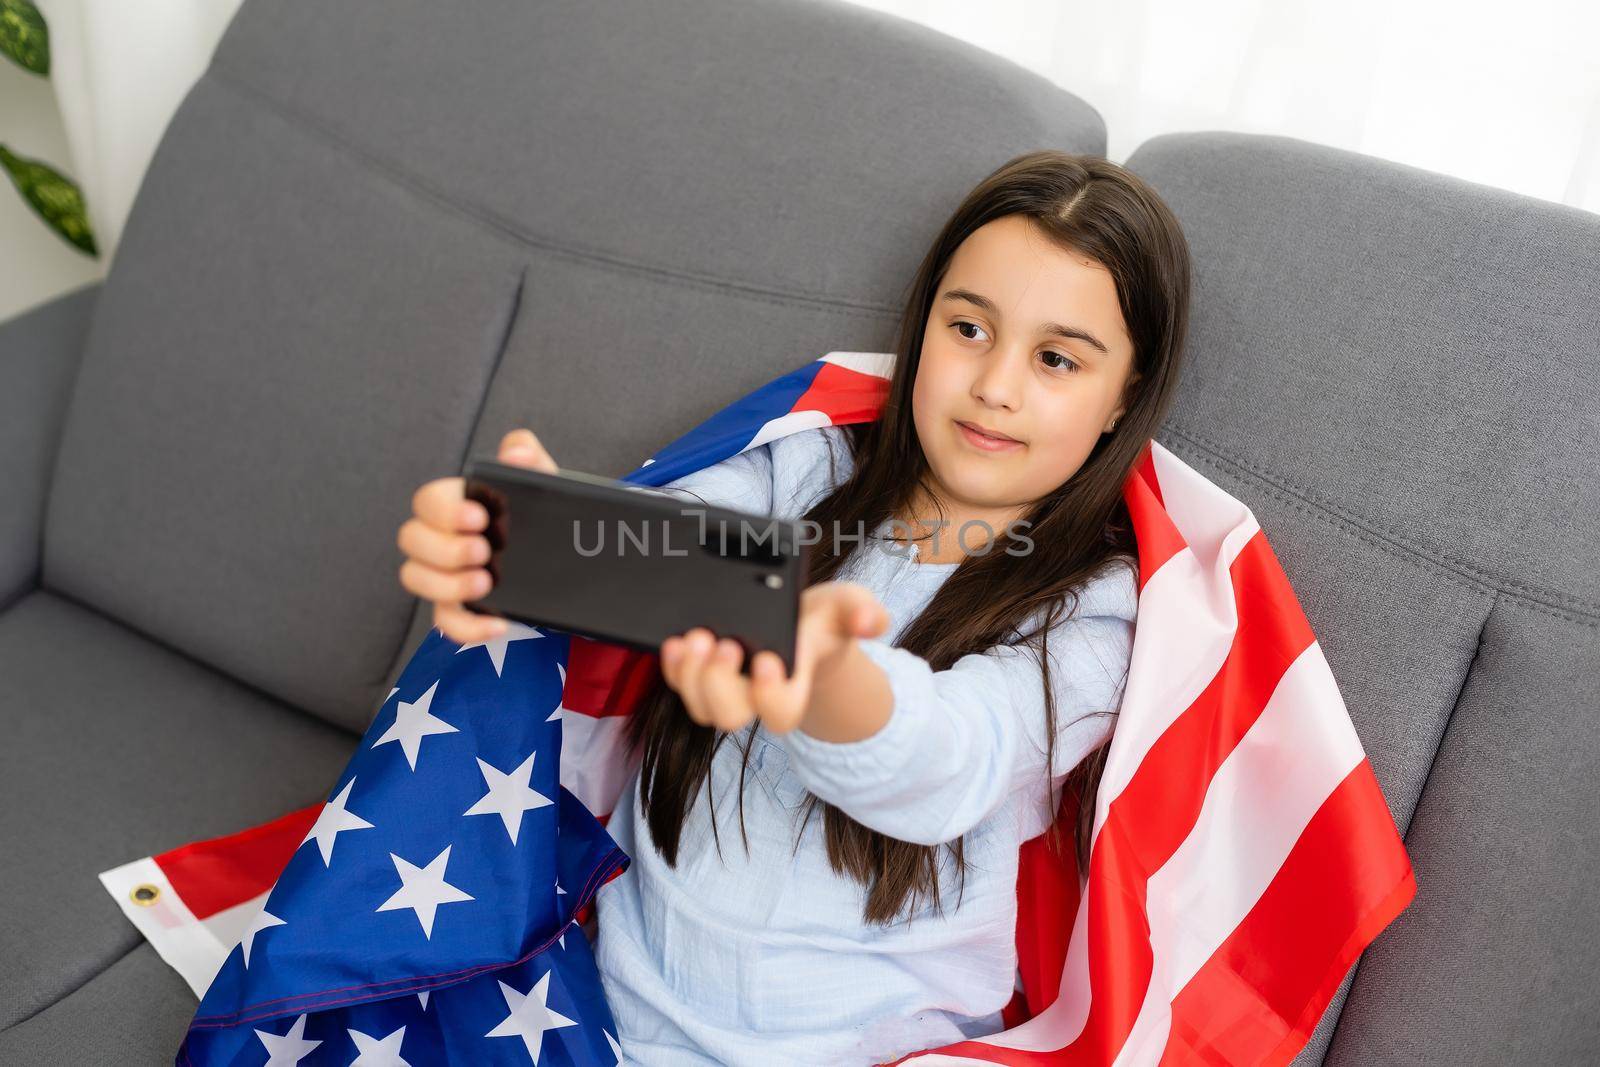 Back to online school education. Difficult to speak English. Kid doing homework on computer. Student studying on laptop over American flag. Tutor teach distantly